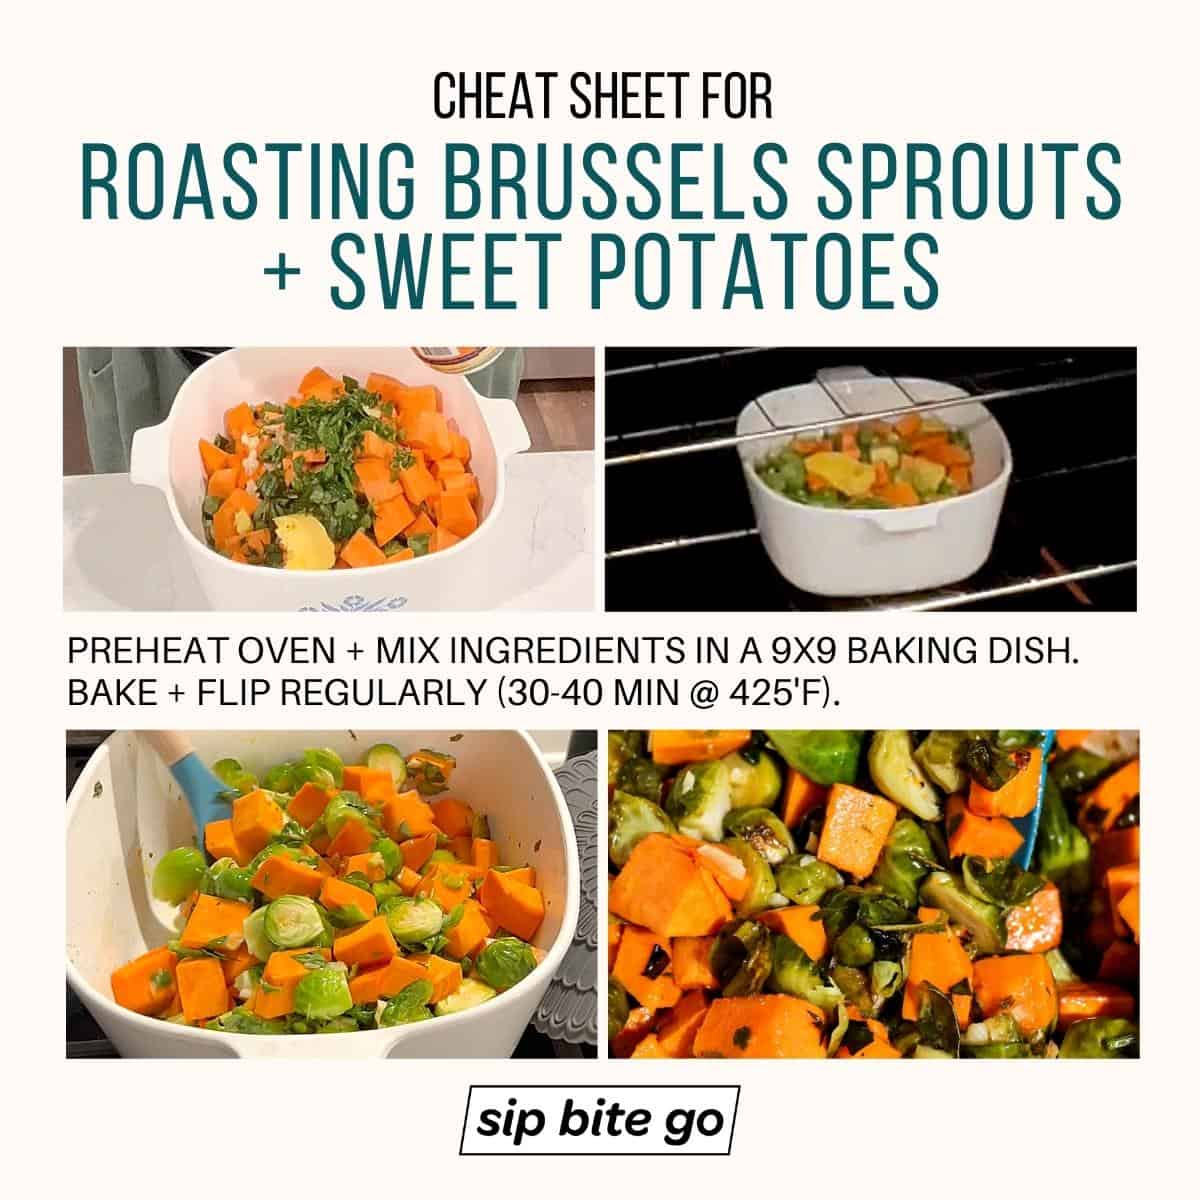 Infographic with steps and captions demonstrating how to roast brussels sprouts and sweet potatoes together